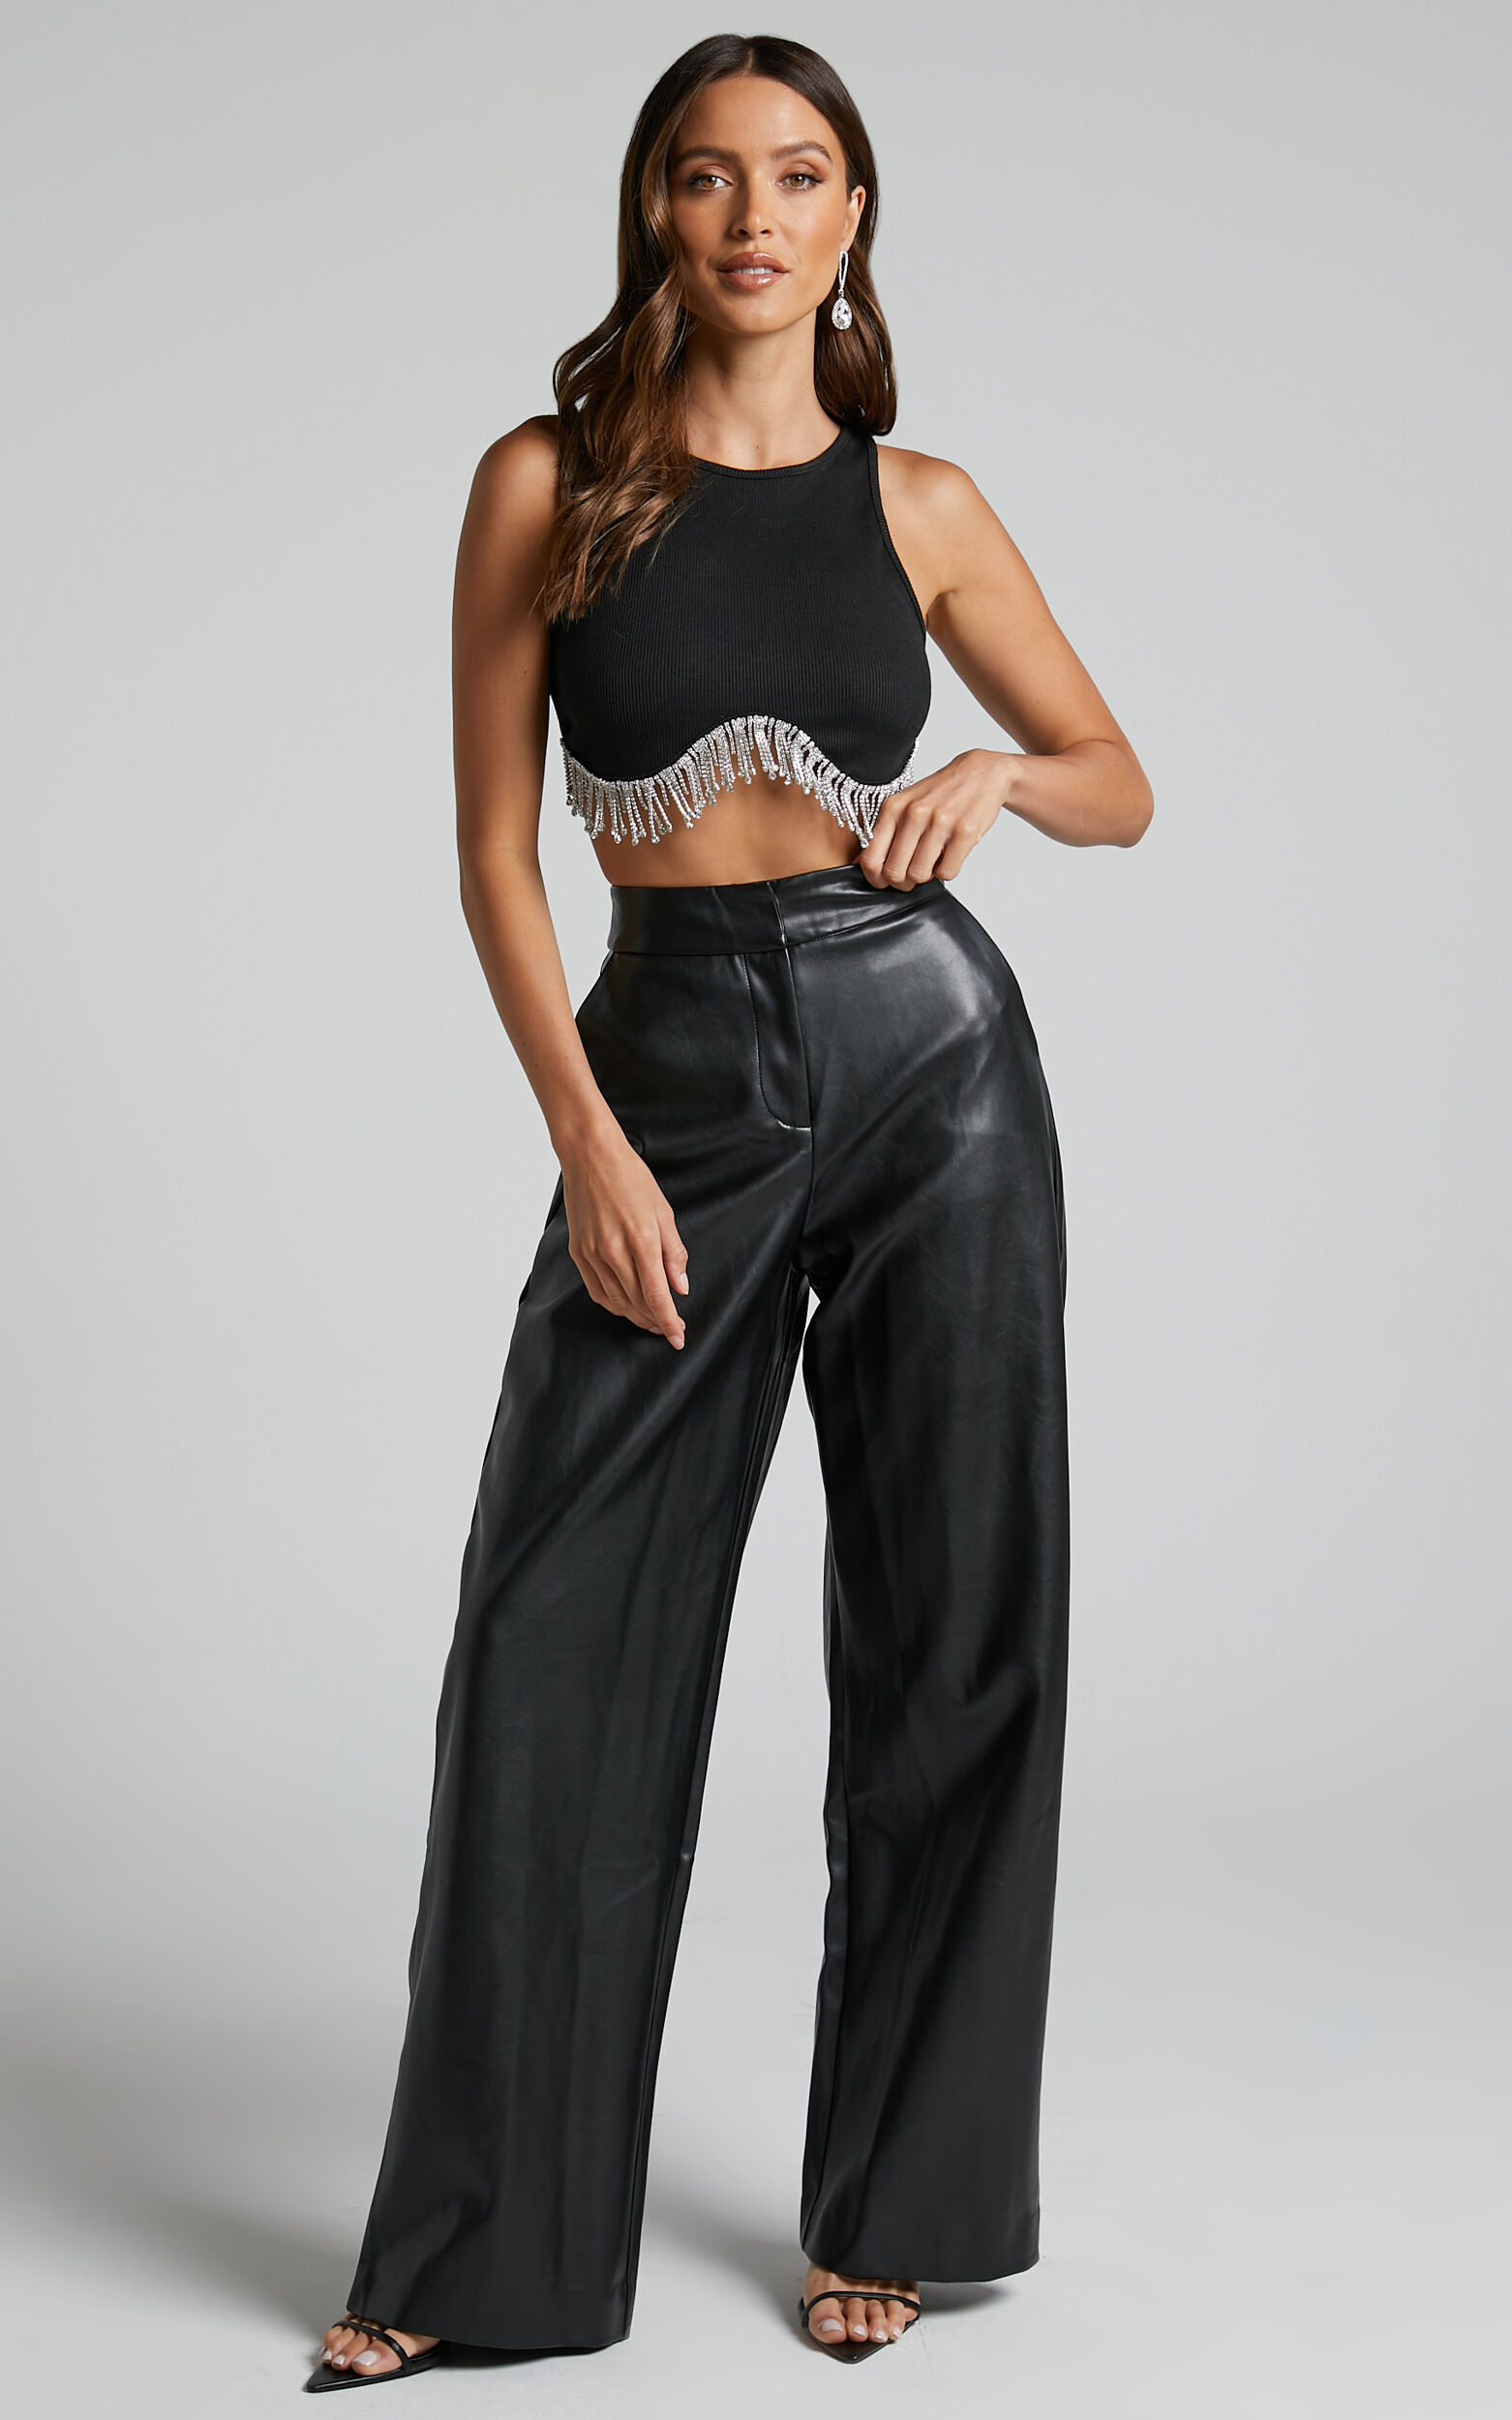 Minx - High Waisted Faux Leather Wide Leg Trousers in Black - 04, BLK1, super-hi-res image number null